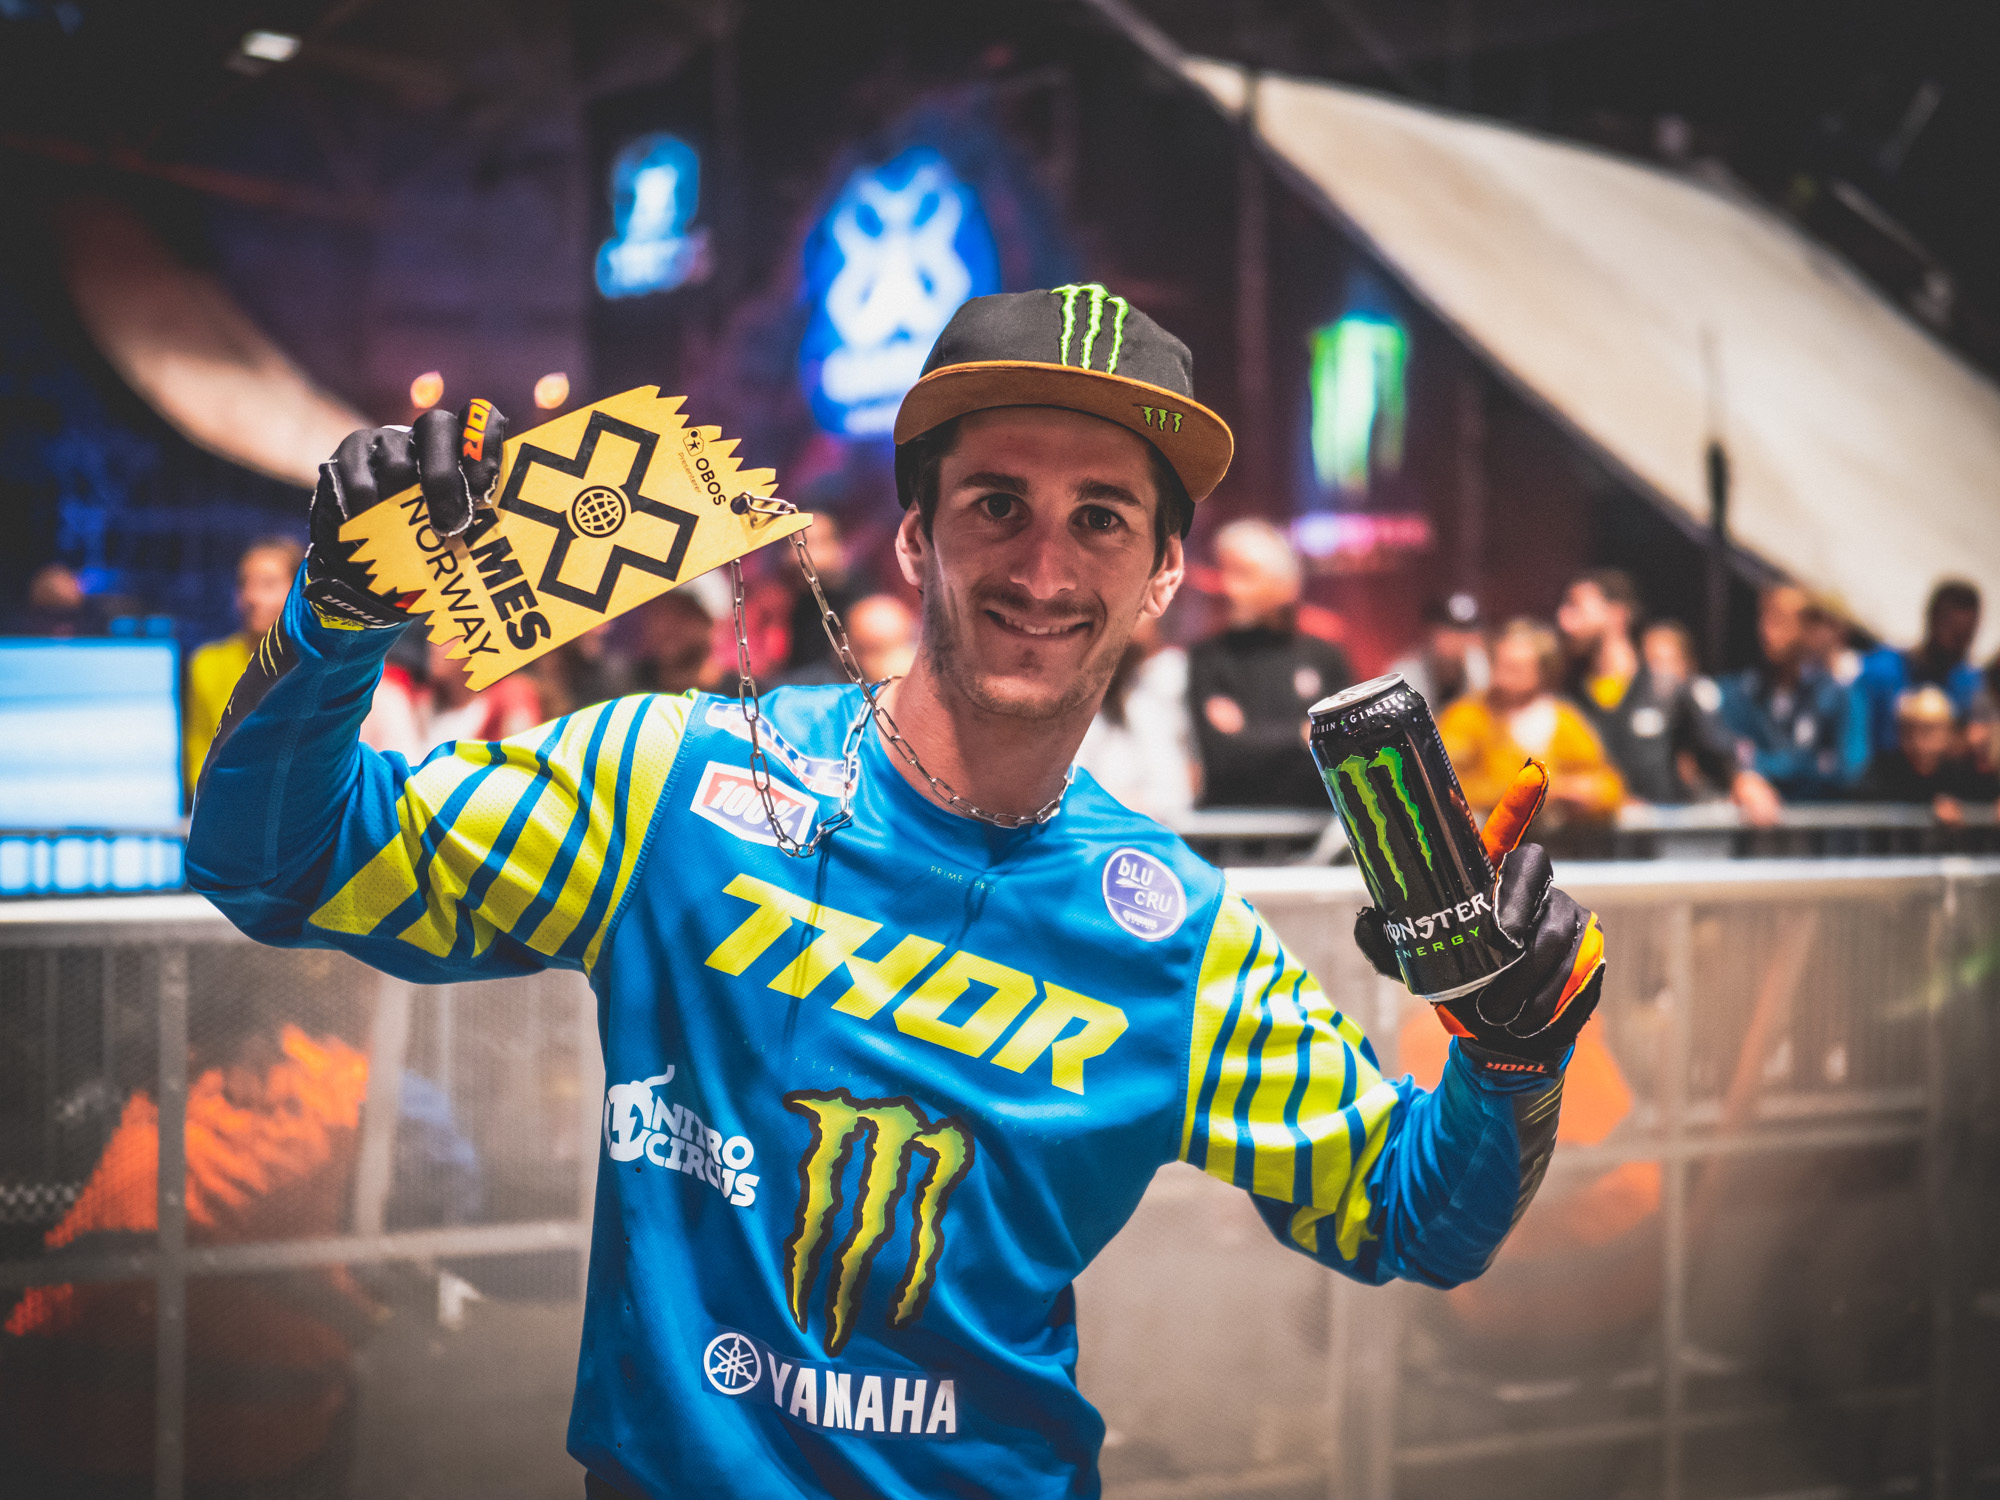 Monster Energy's Jarryd McNeil Claims Gold in Moto X Best Whip at X Games Norway 2019 and Ties Travis Pastrana for Most Motocross Medals at X Games